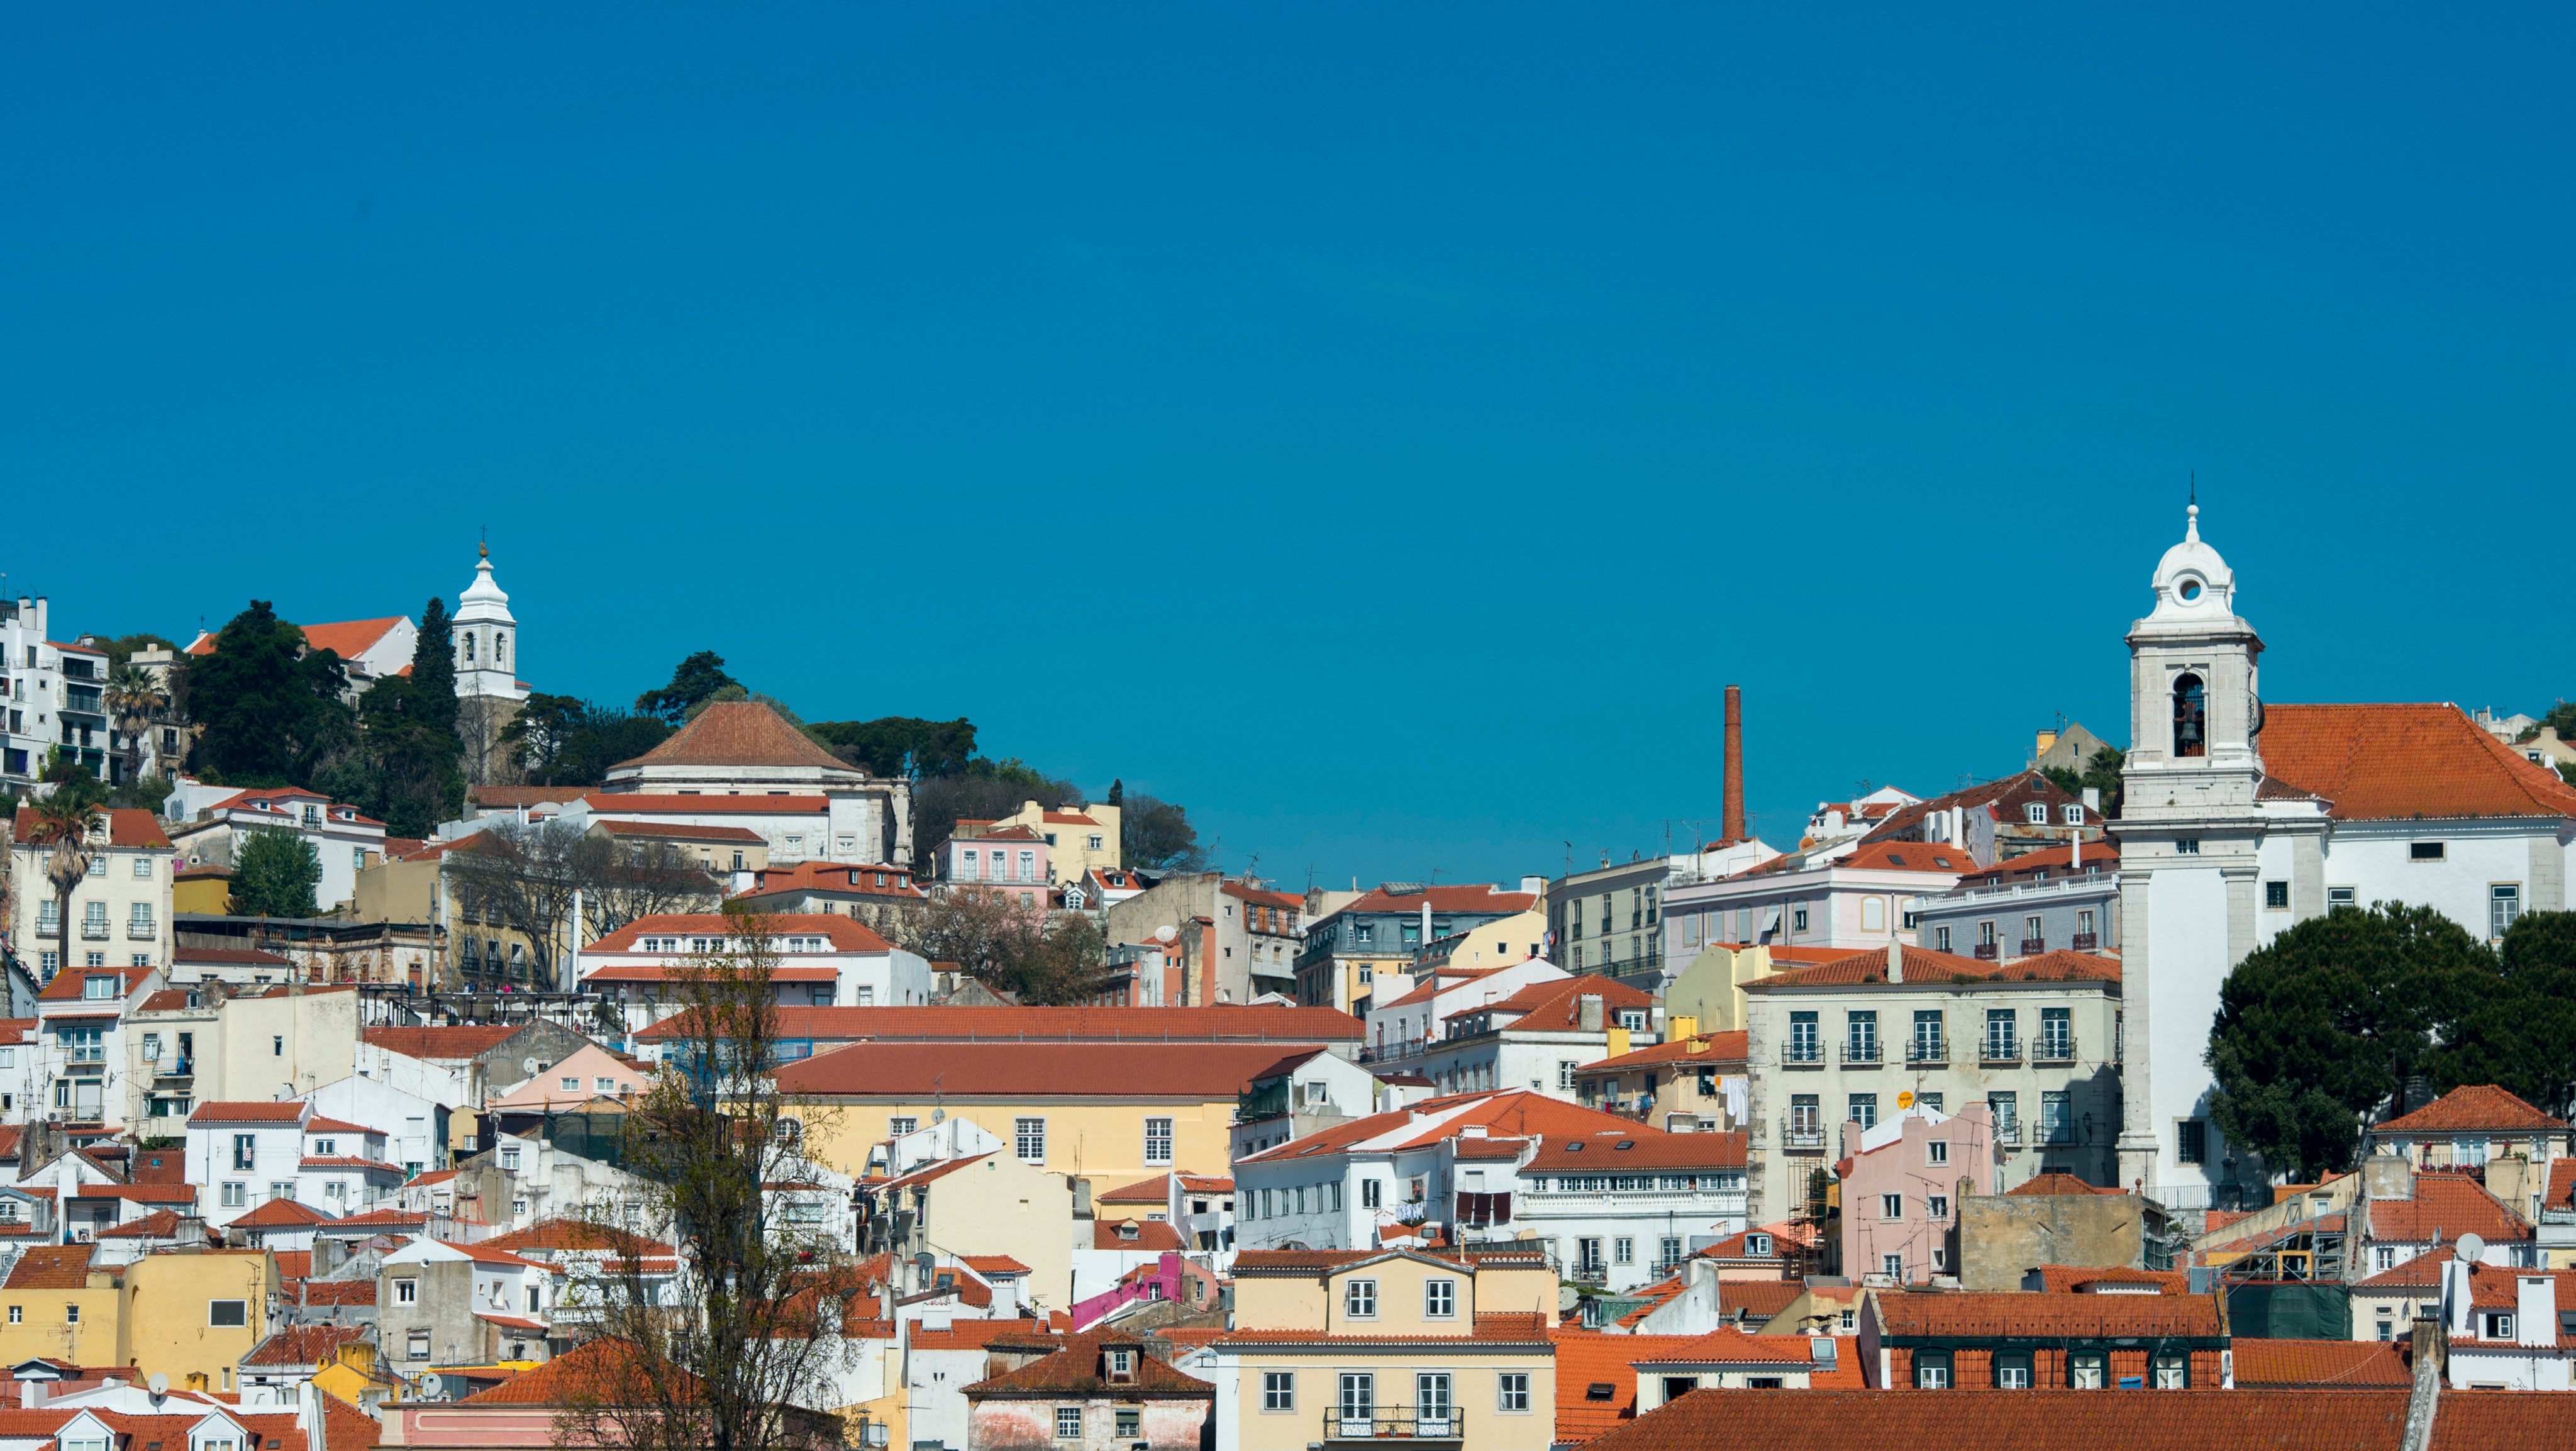 View from the Tagus River of Lisbon, the capital city of